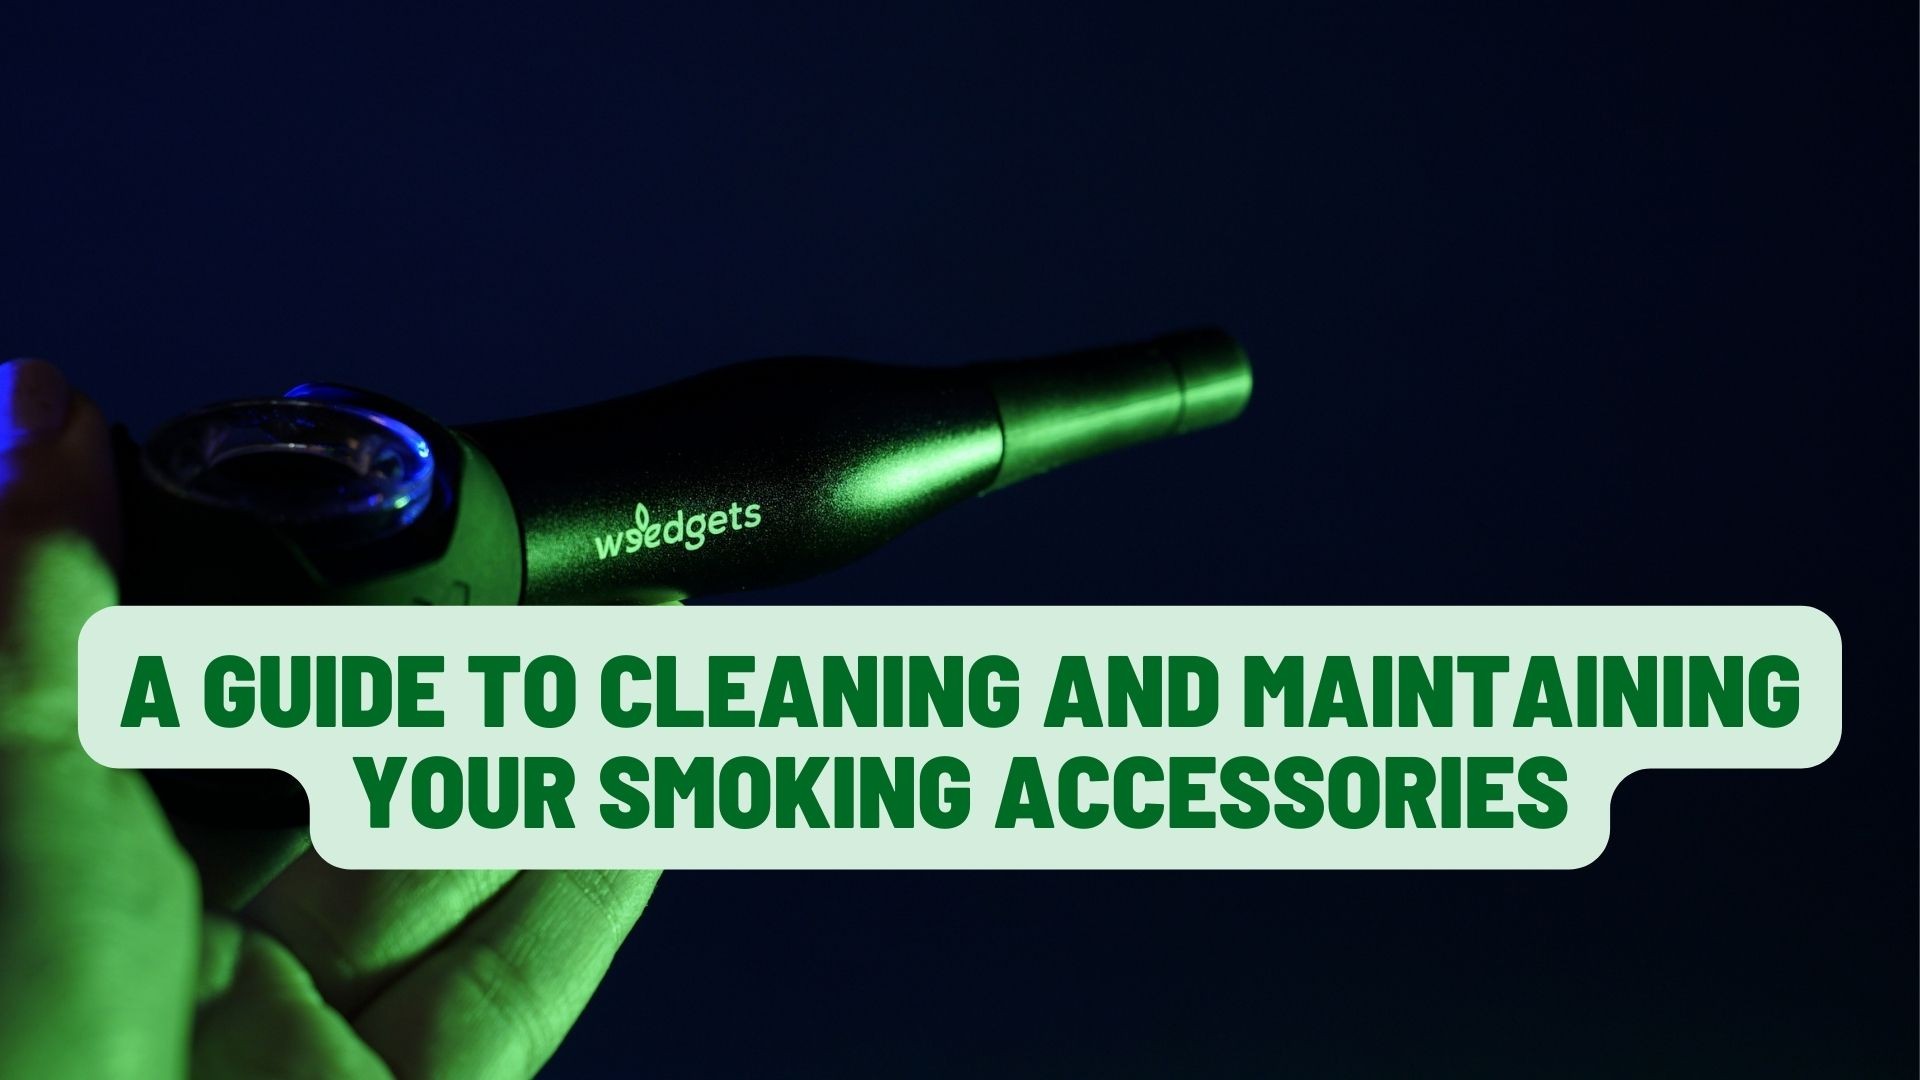 A Guide to Cleaning and Maintaining Your Smoking Accessories